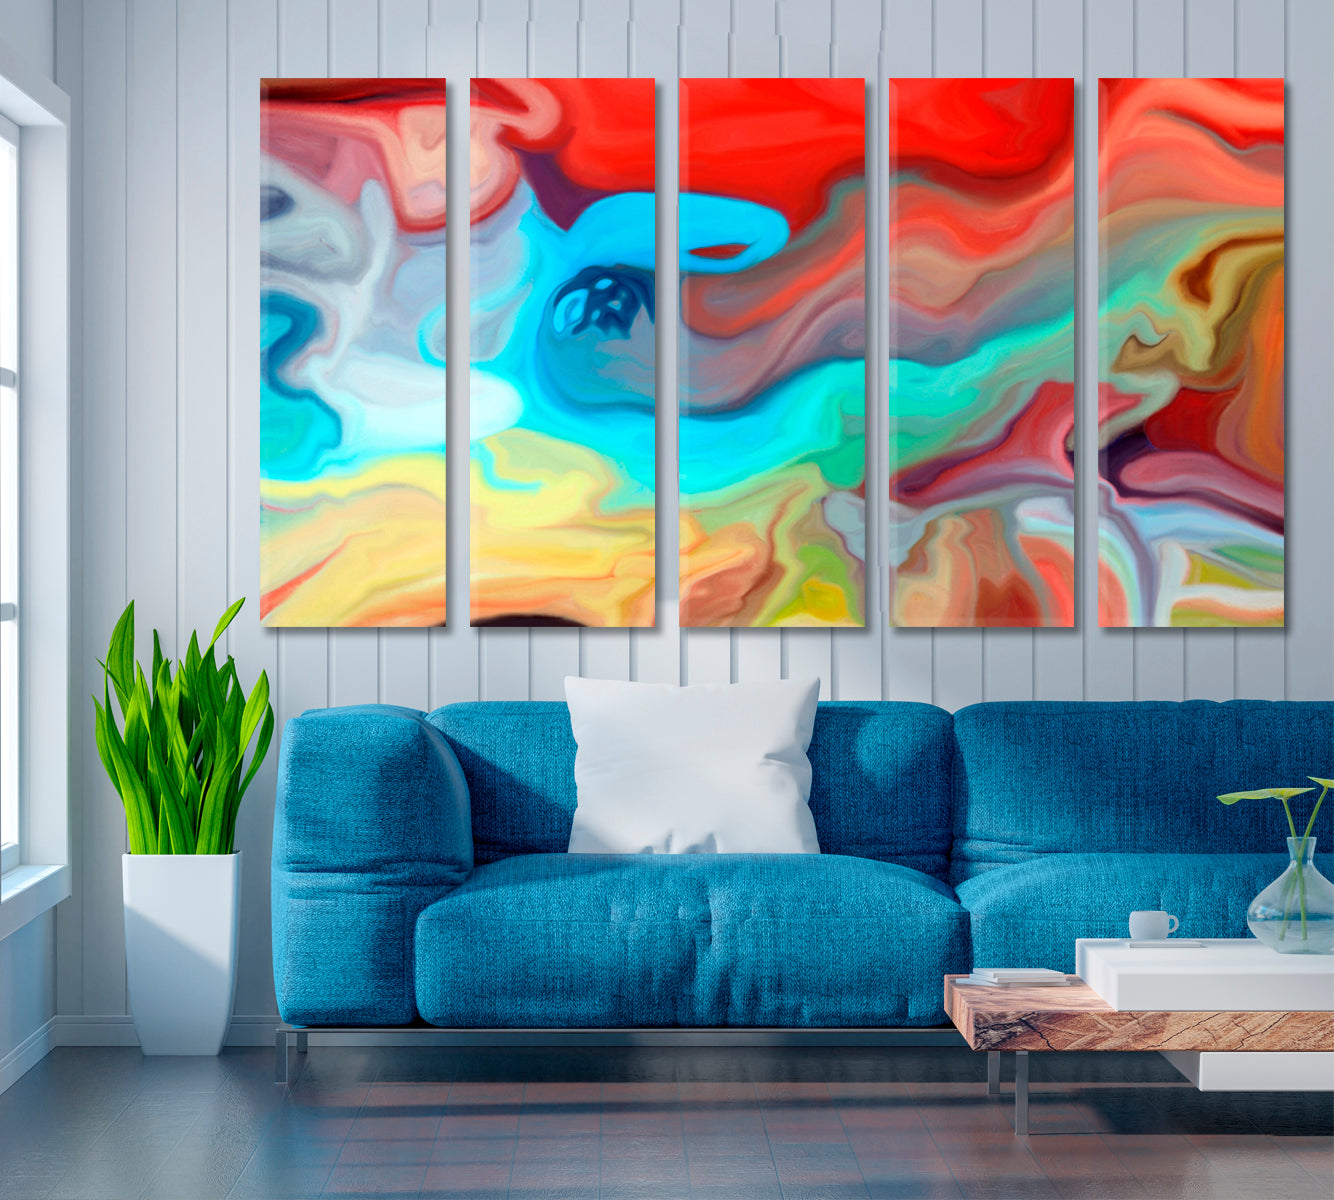 Modern Vivid Abstract Lines and Colors Abstract Art Print Artesty 5 panels 36" x 24" 